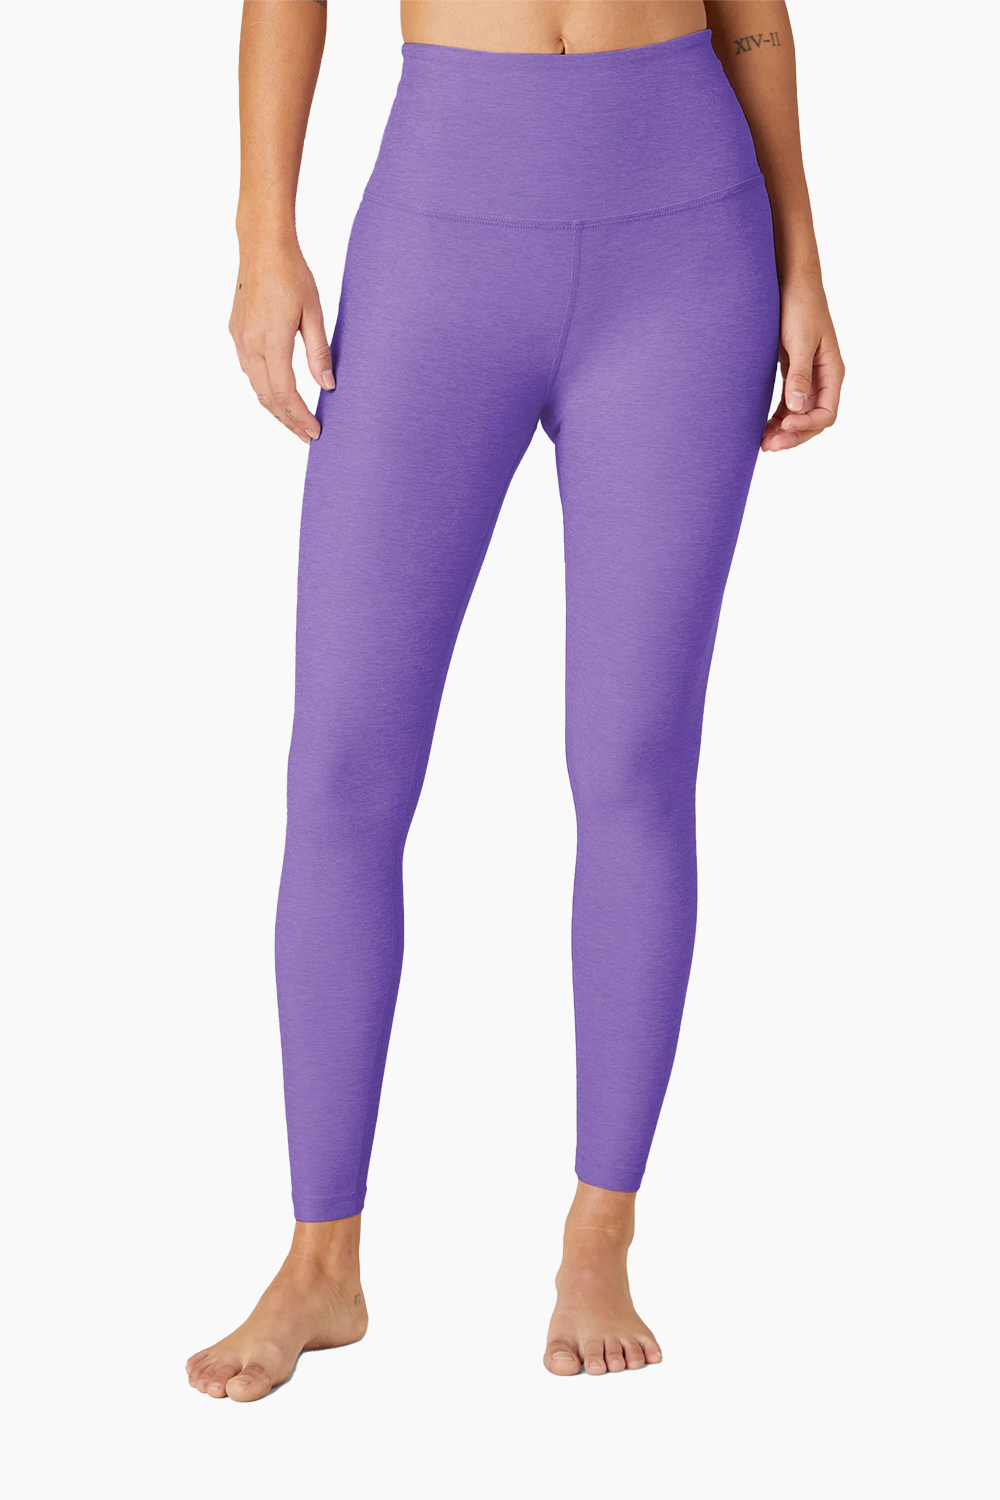 Beyond Yoga Spacedye Caught In The Midi High Waisted Legging in Bright –  BOUTIQUE TAG